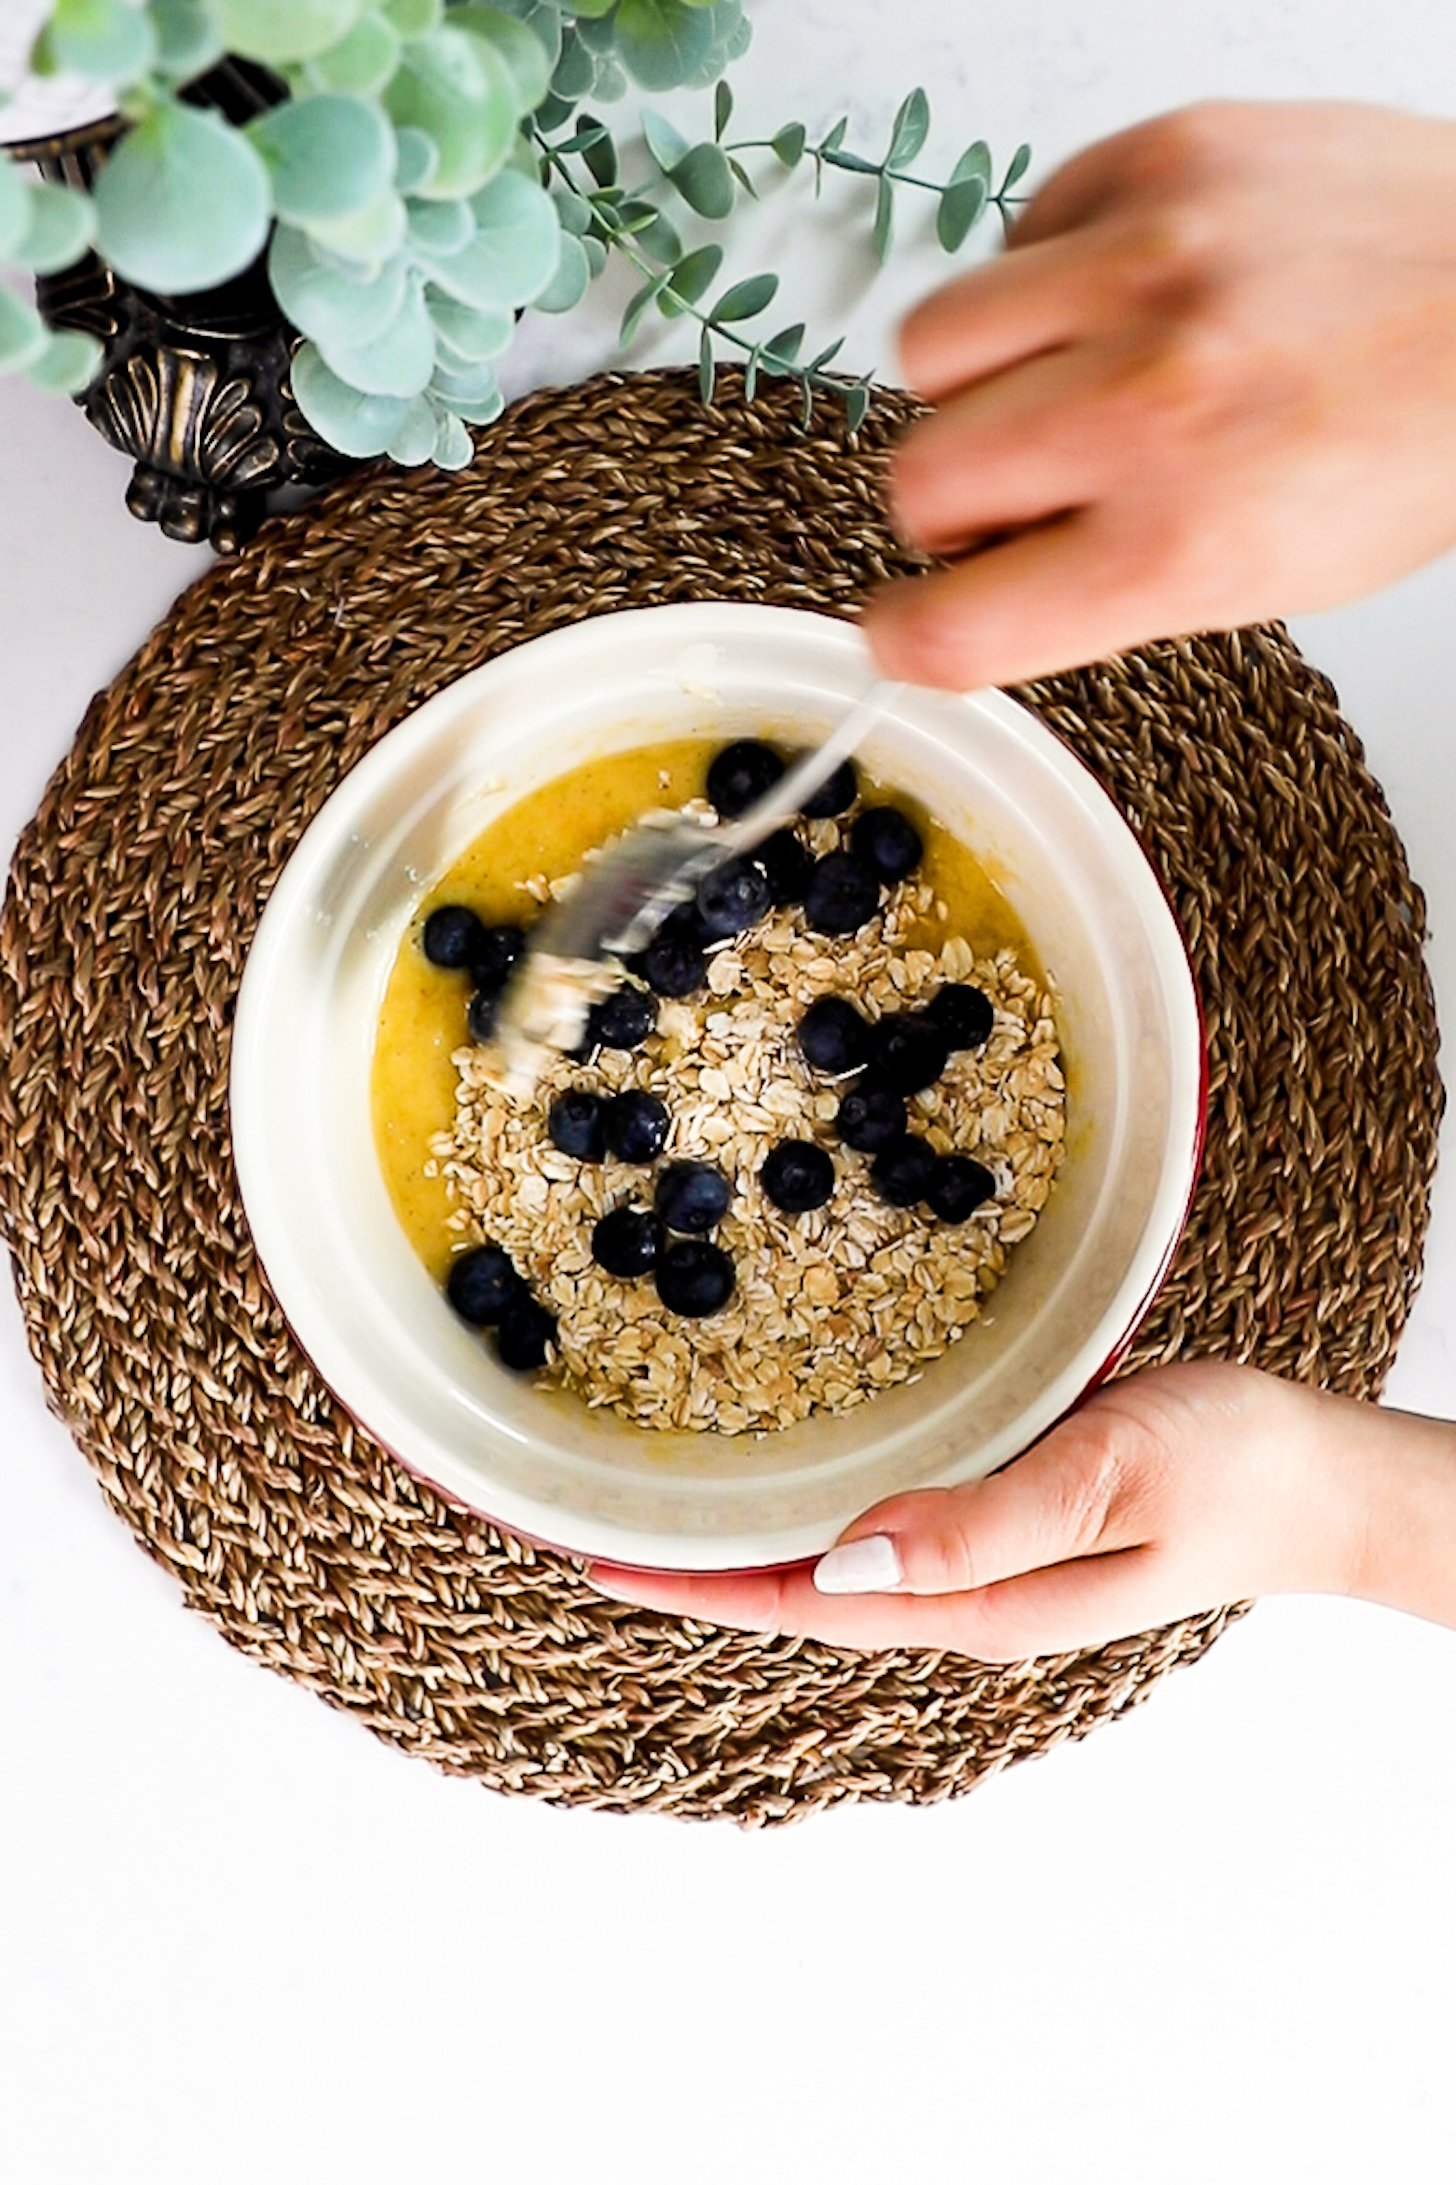 A hand holding a bowl and spoon mixing oats and blueberries into the wet ingredients.